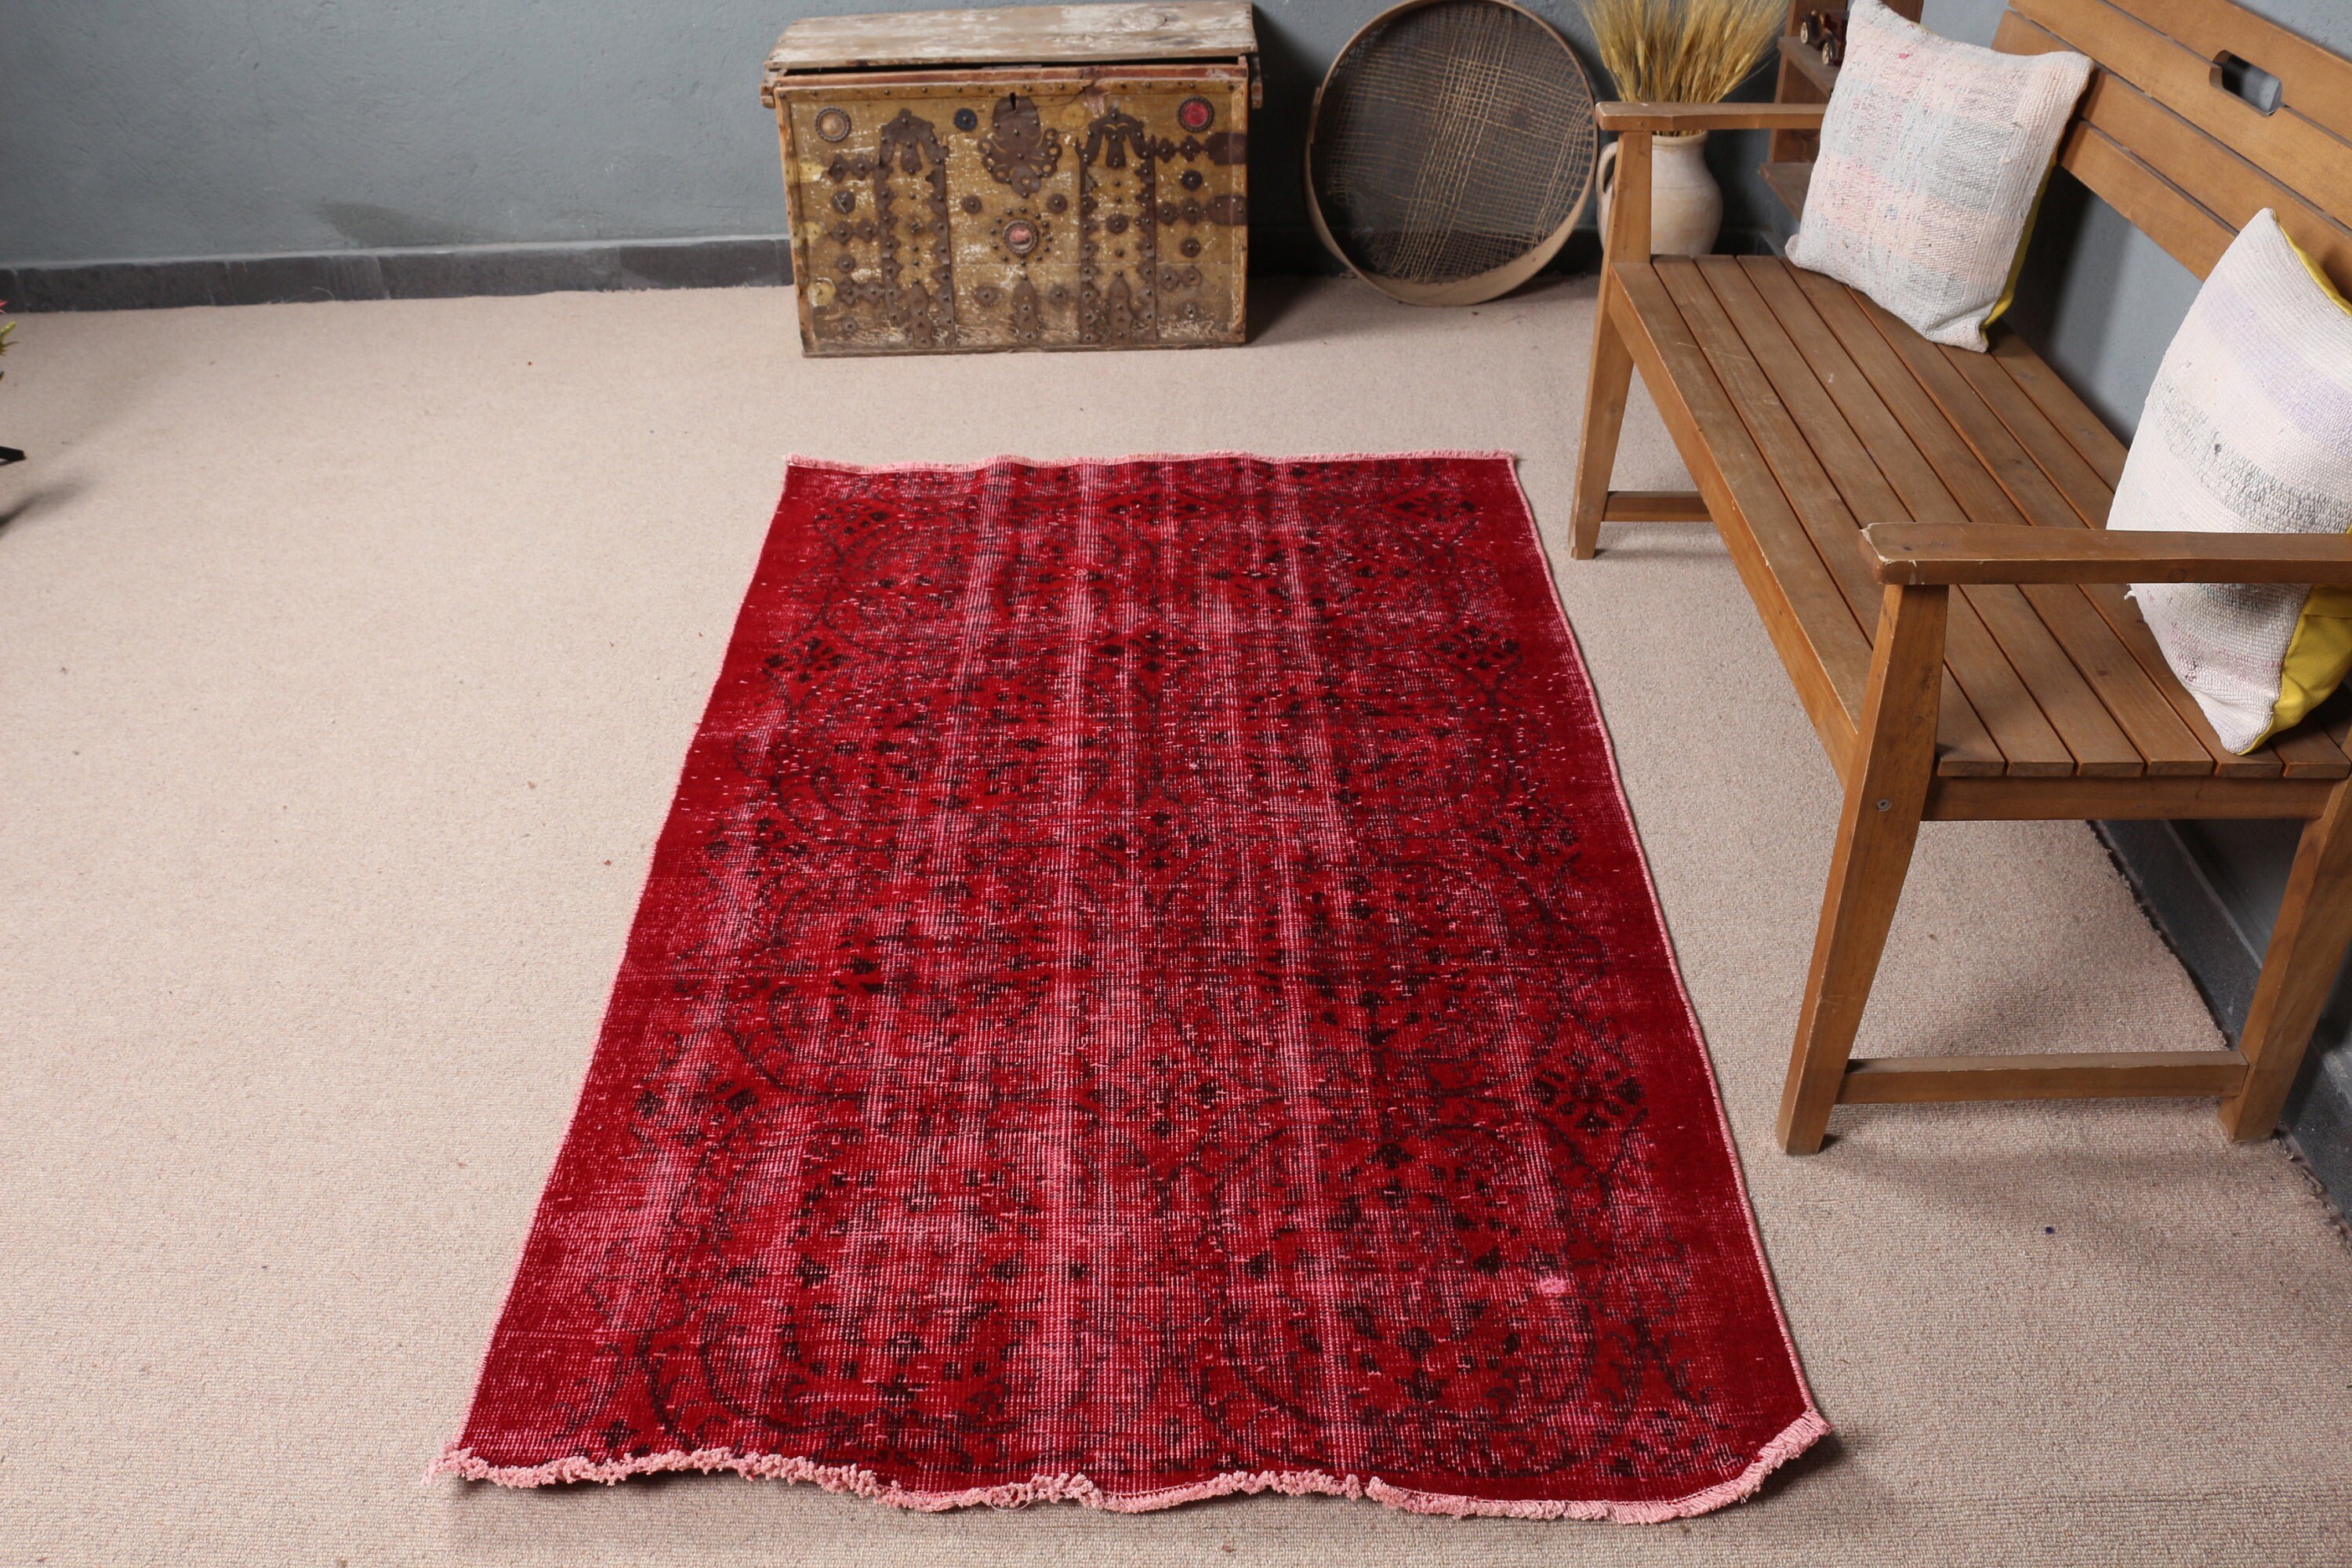 Rugs for Entry, 3.8x6.2 ft Accent Rug, Vintage Rug, Floor Rug, Red Cool Rug, Muted Rug, Entry Rug, Moroccan Rug, Kitchen Rugs, Turkish Rug